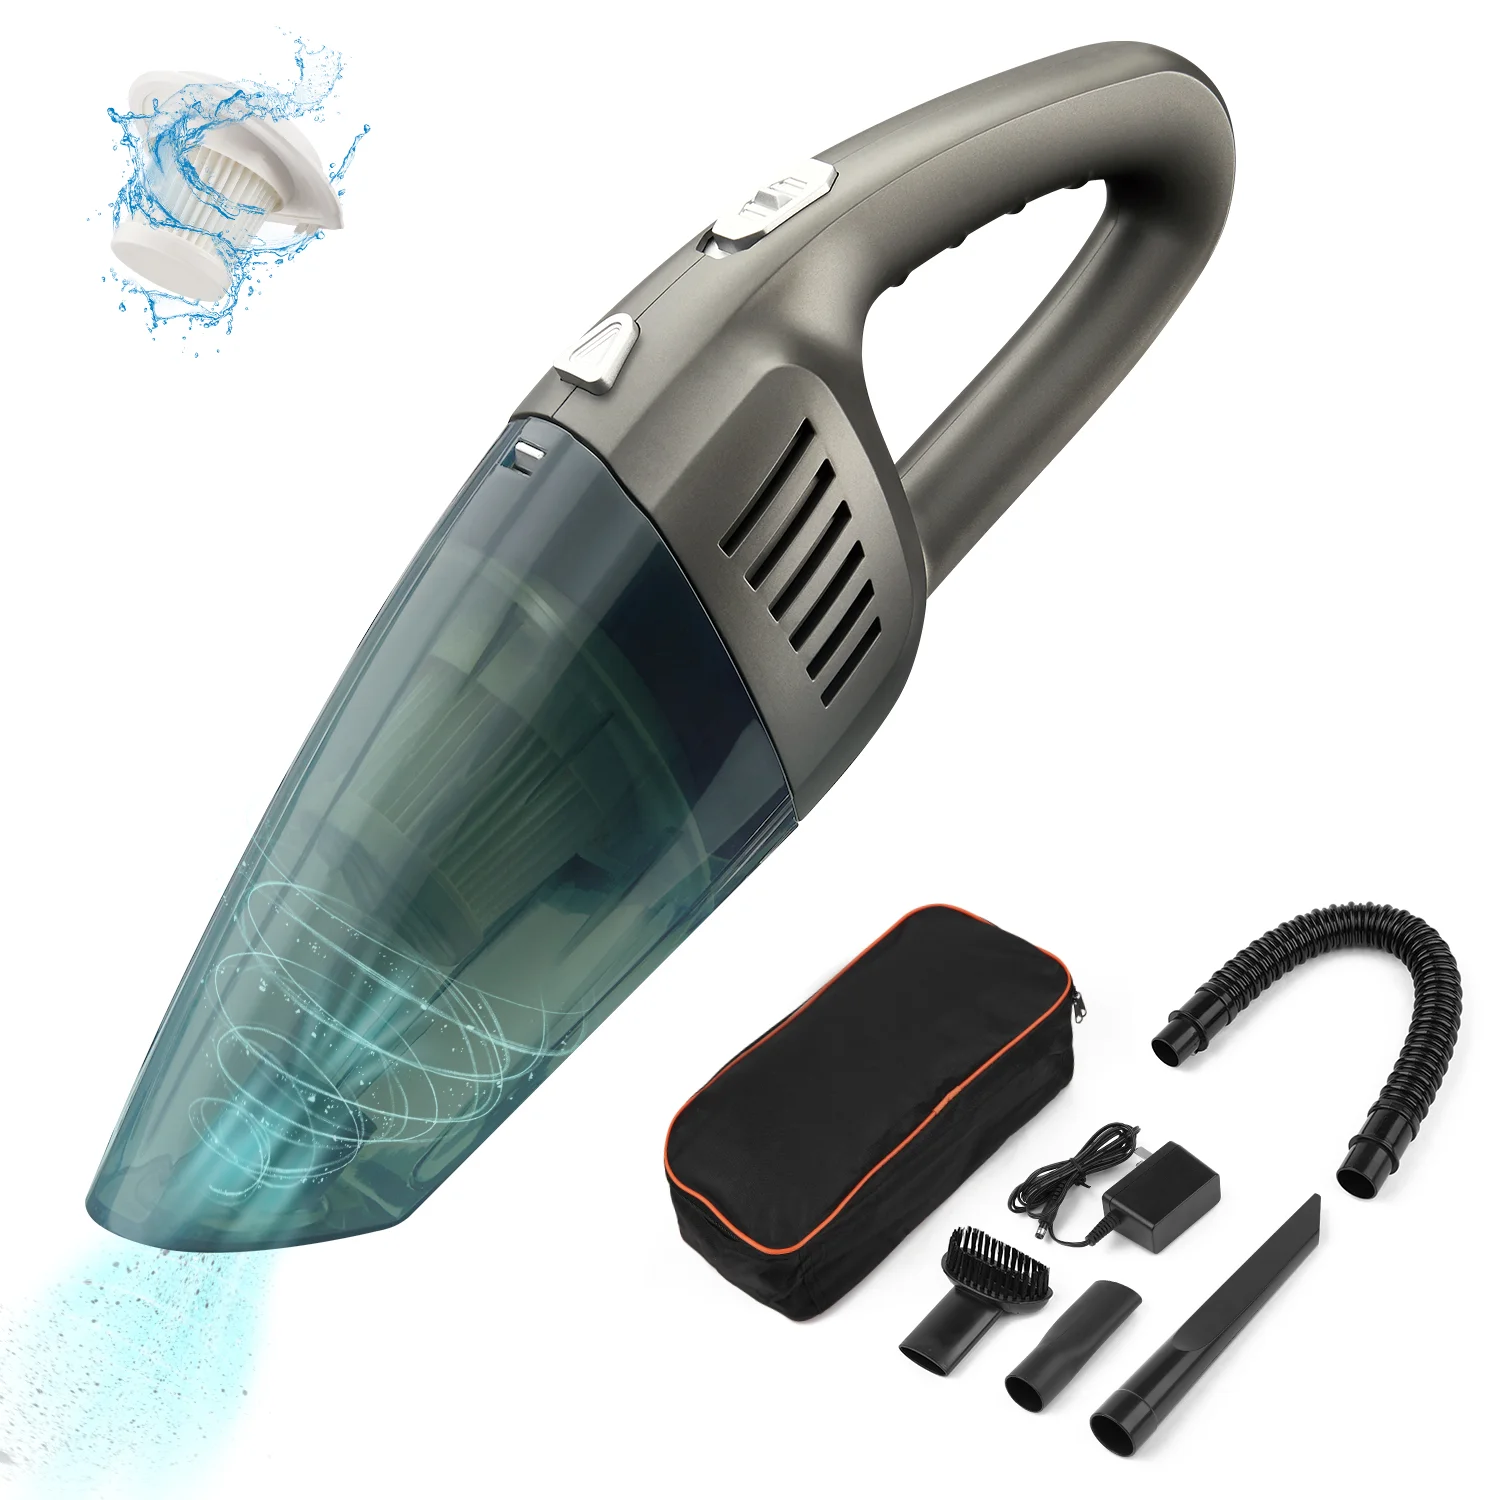 Powerful Car Vacuum Cleaner Mini Wireless Handheld Auto Vaccum 8000Pa Portable Type C Charge For Home Car Office Cleaning